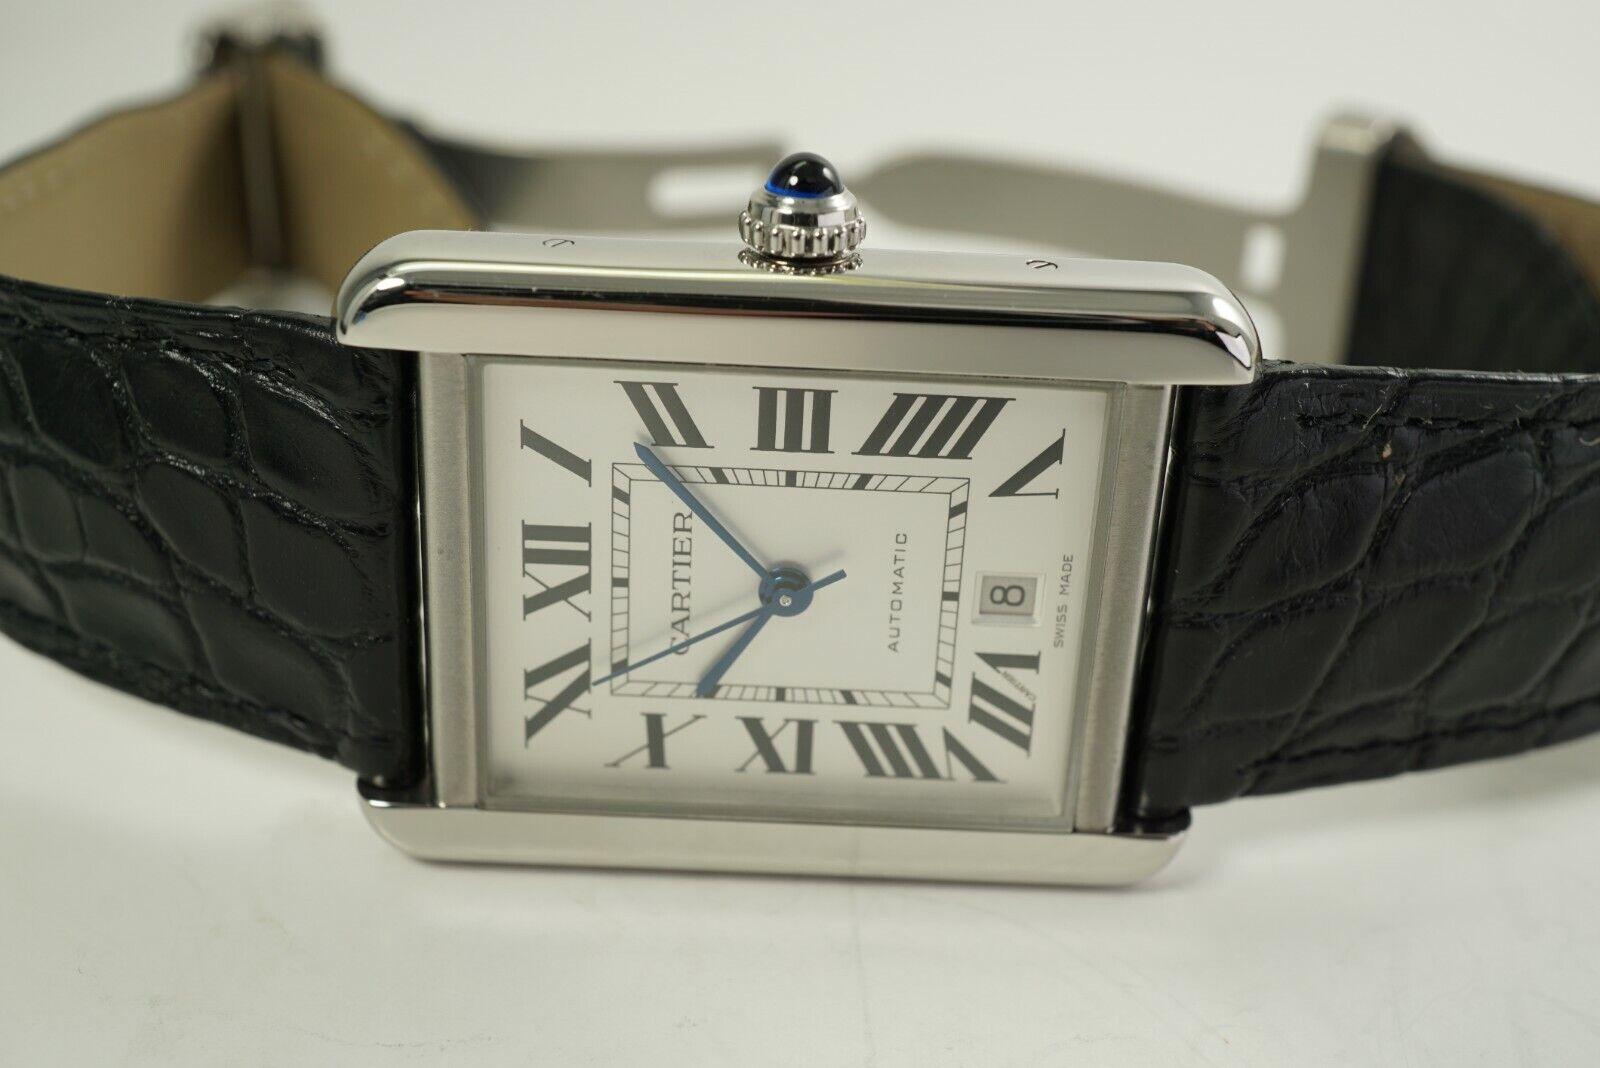 CARTIER TANK SOLO XL AUTOMATIC DATE 3515 STAINLESS STEEL DATE

Original strap number 